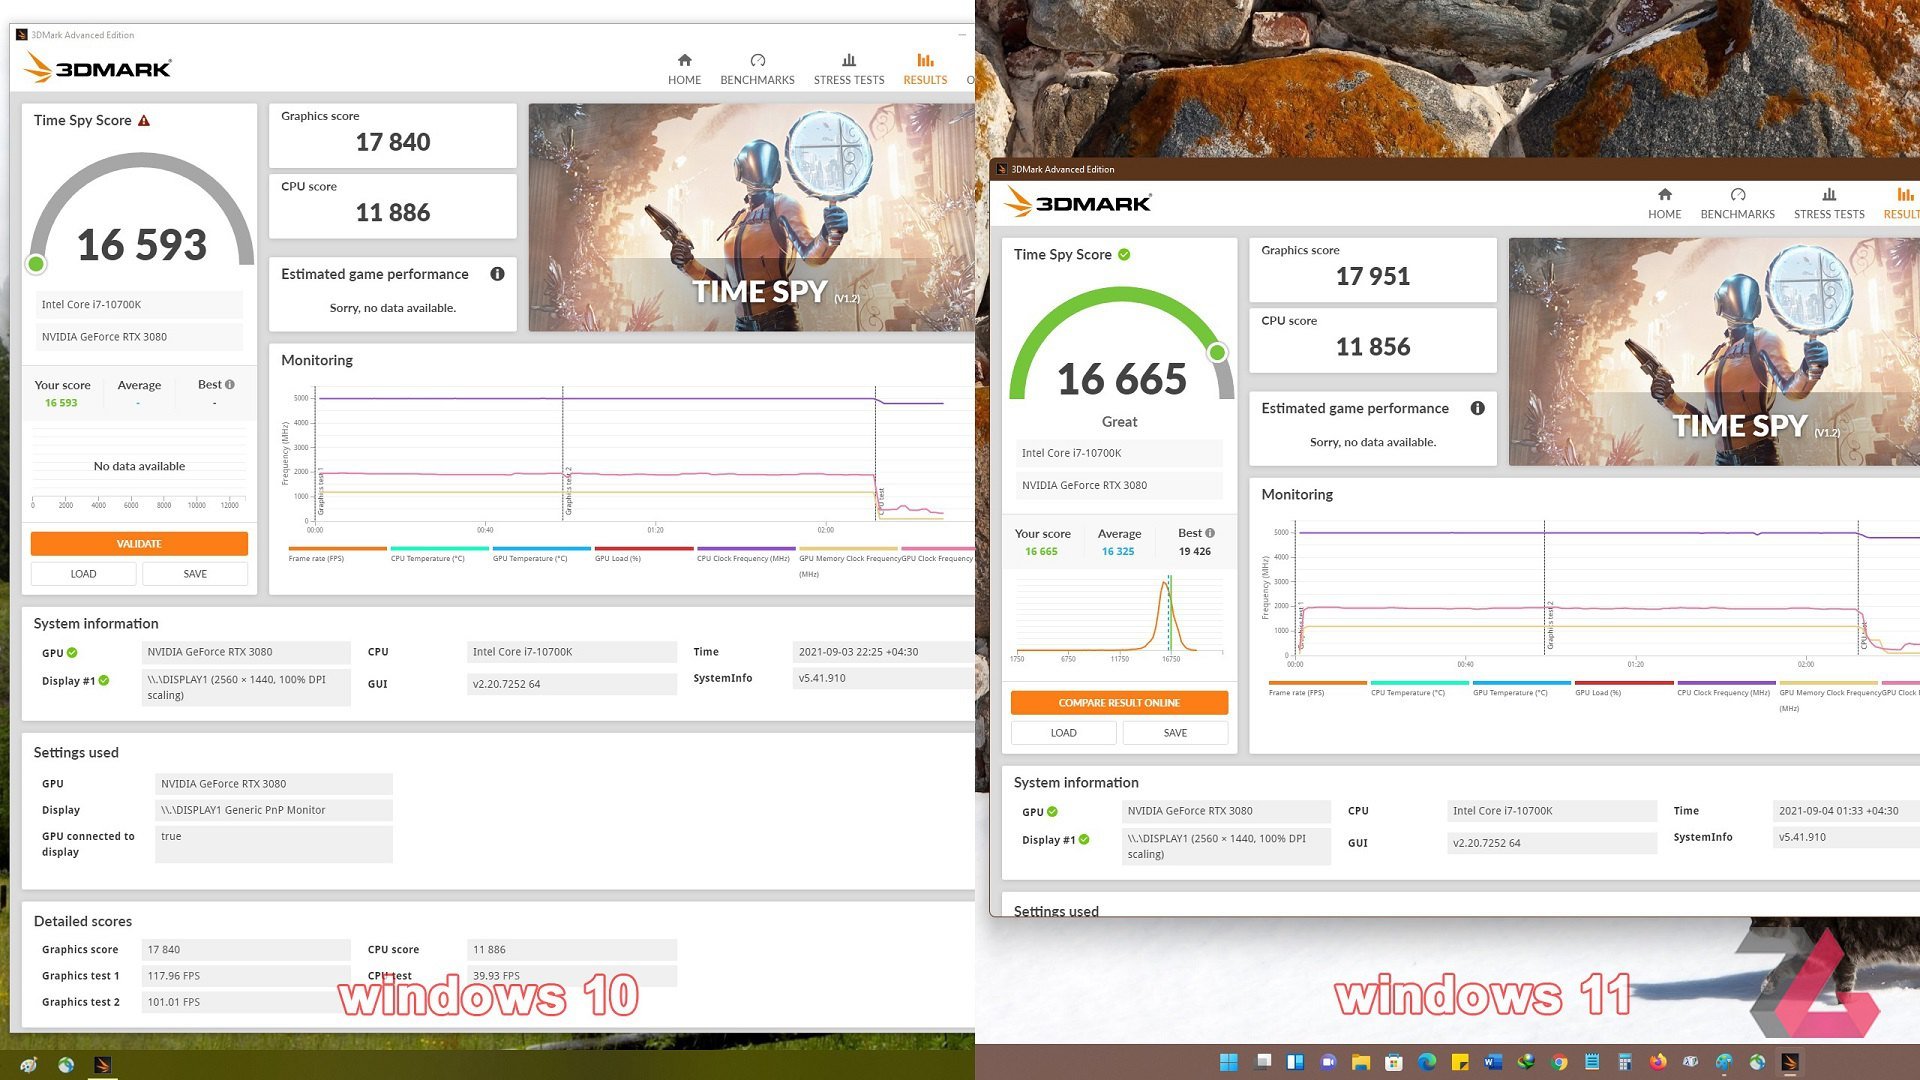 Compare 3DMark Time Spy test performance between Windows 10 and Windows 11